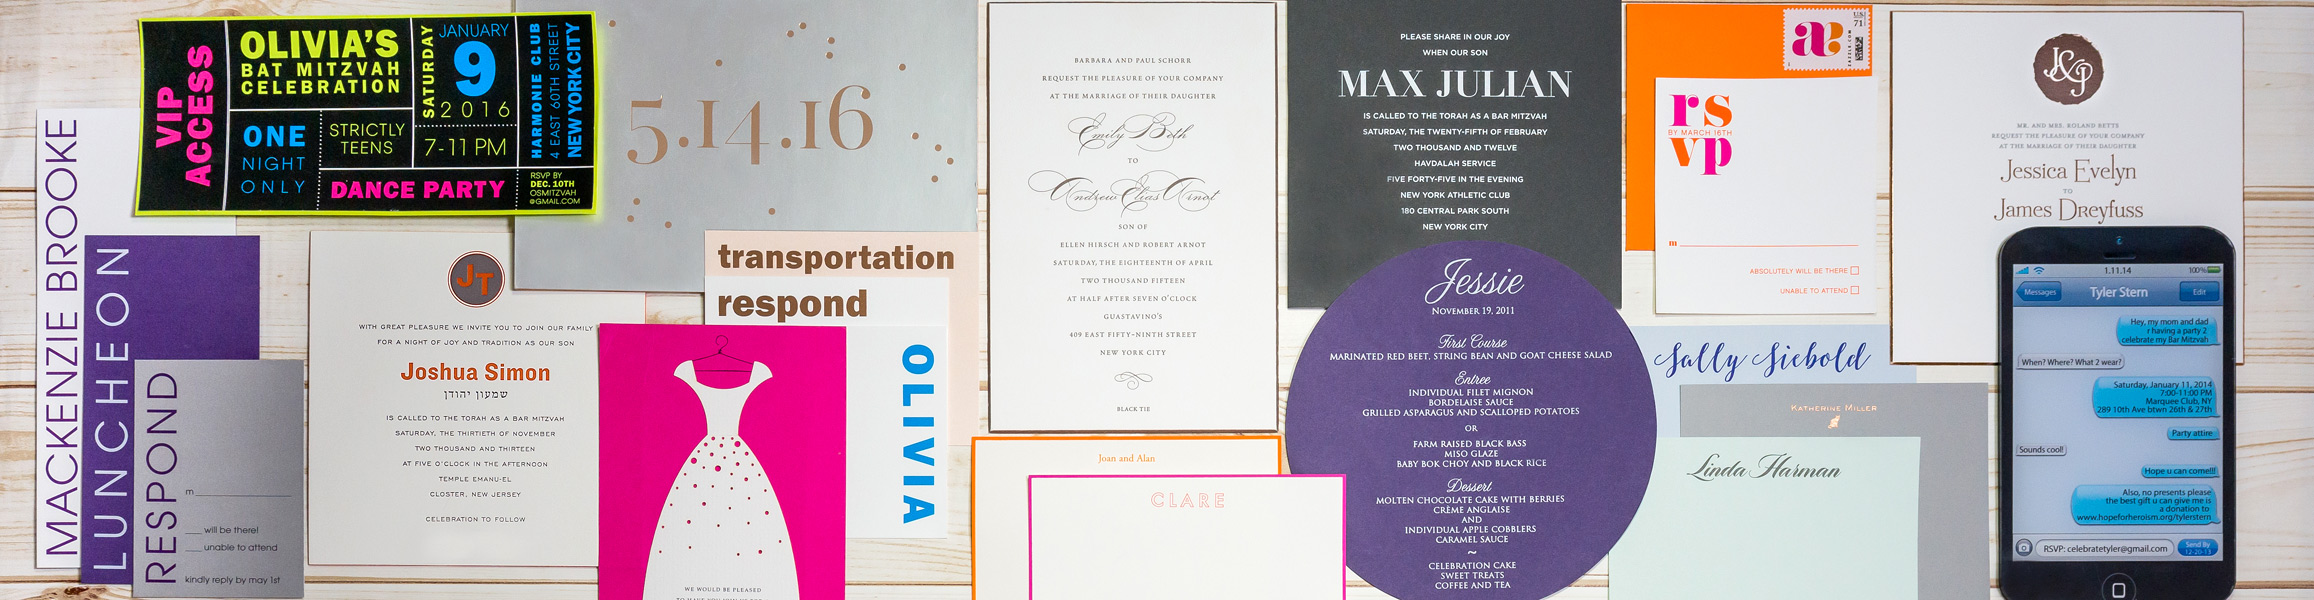 Weddings, Birthdays, Bat/Bar Mitzvahs, Anniversaries - made memorable with personalized invitations and favors